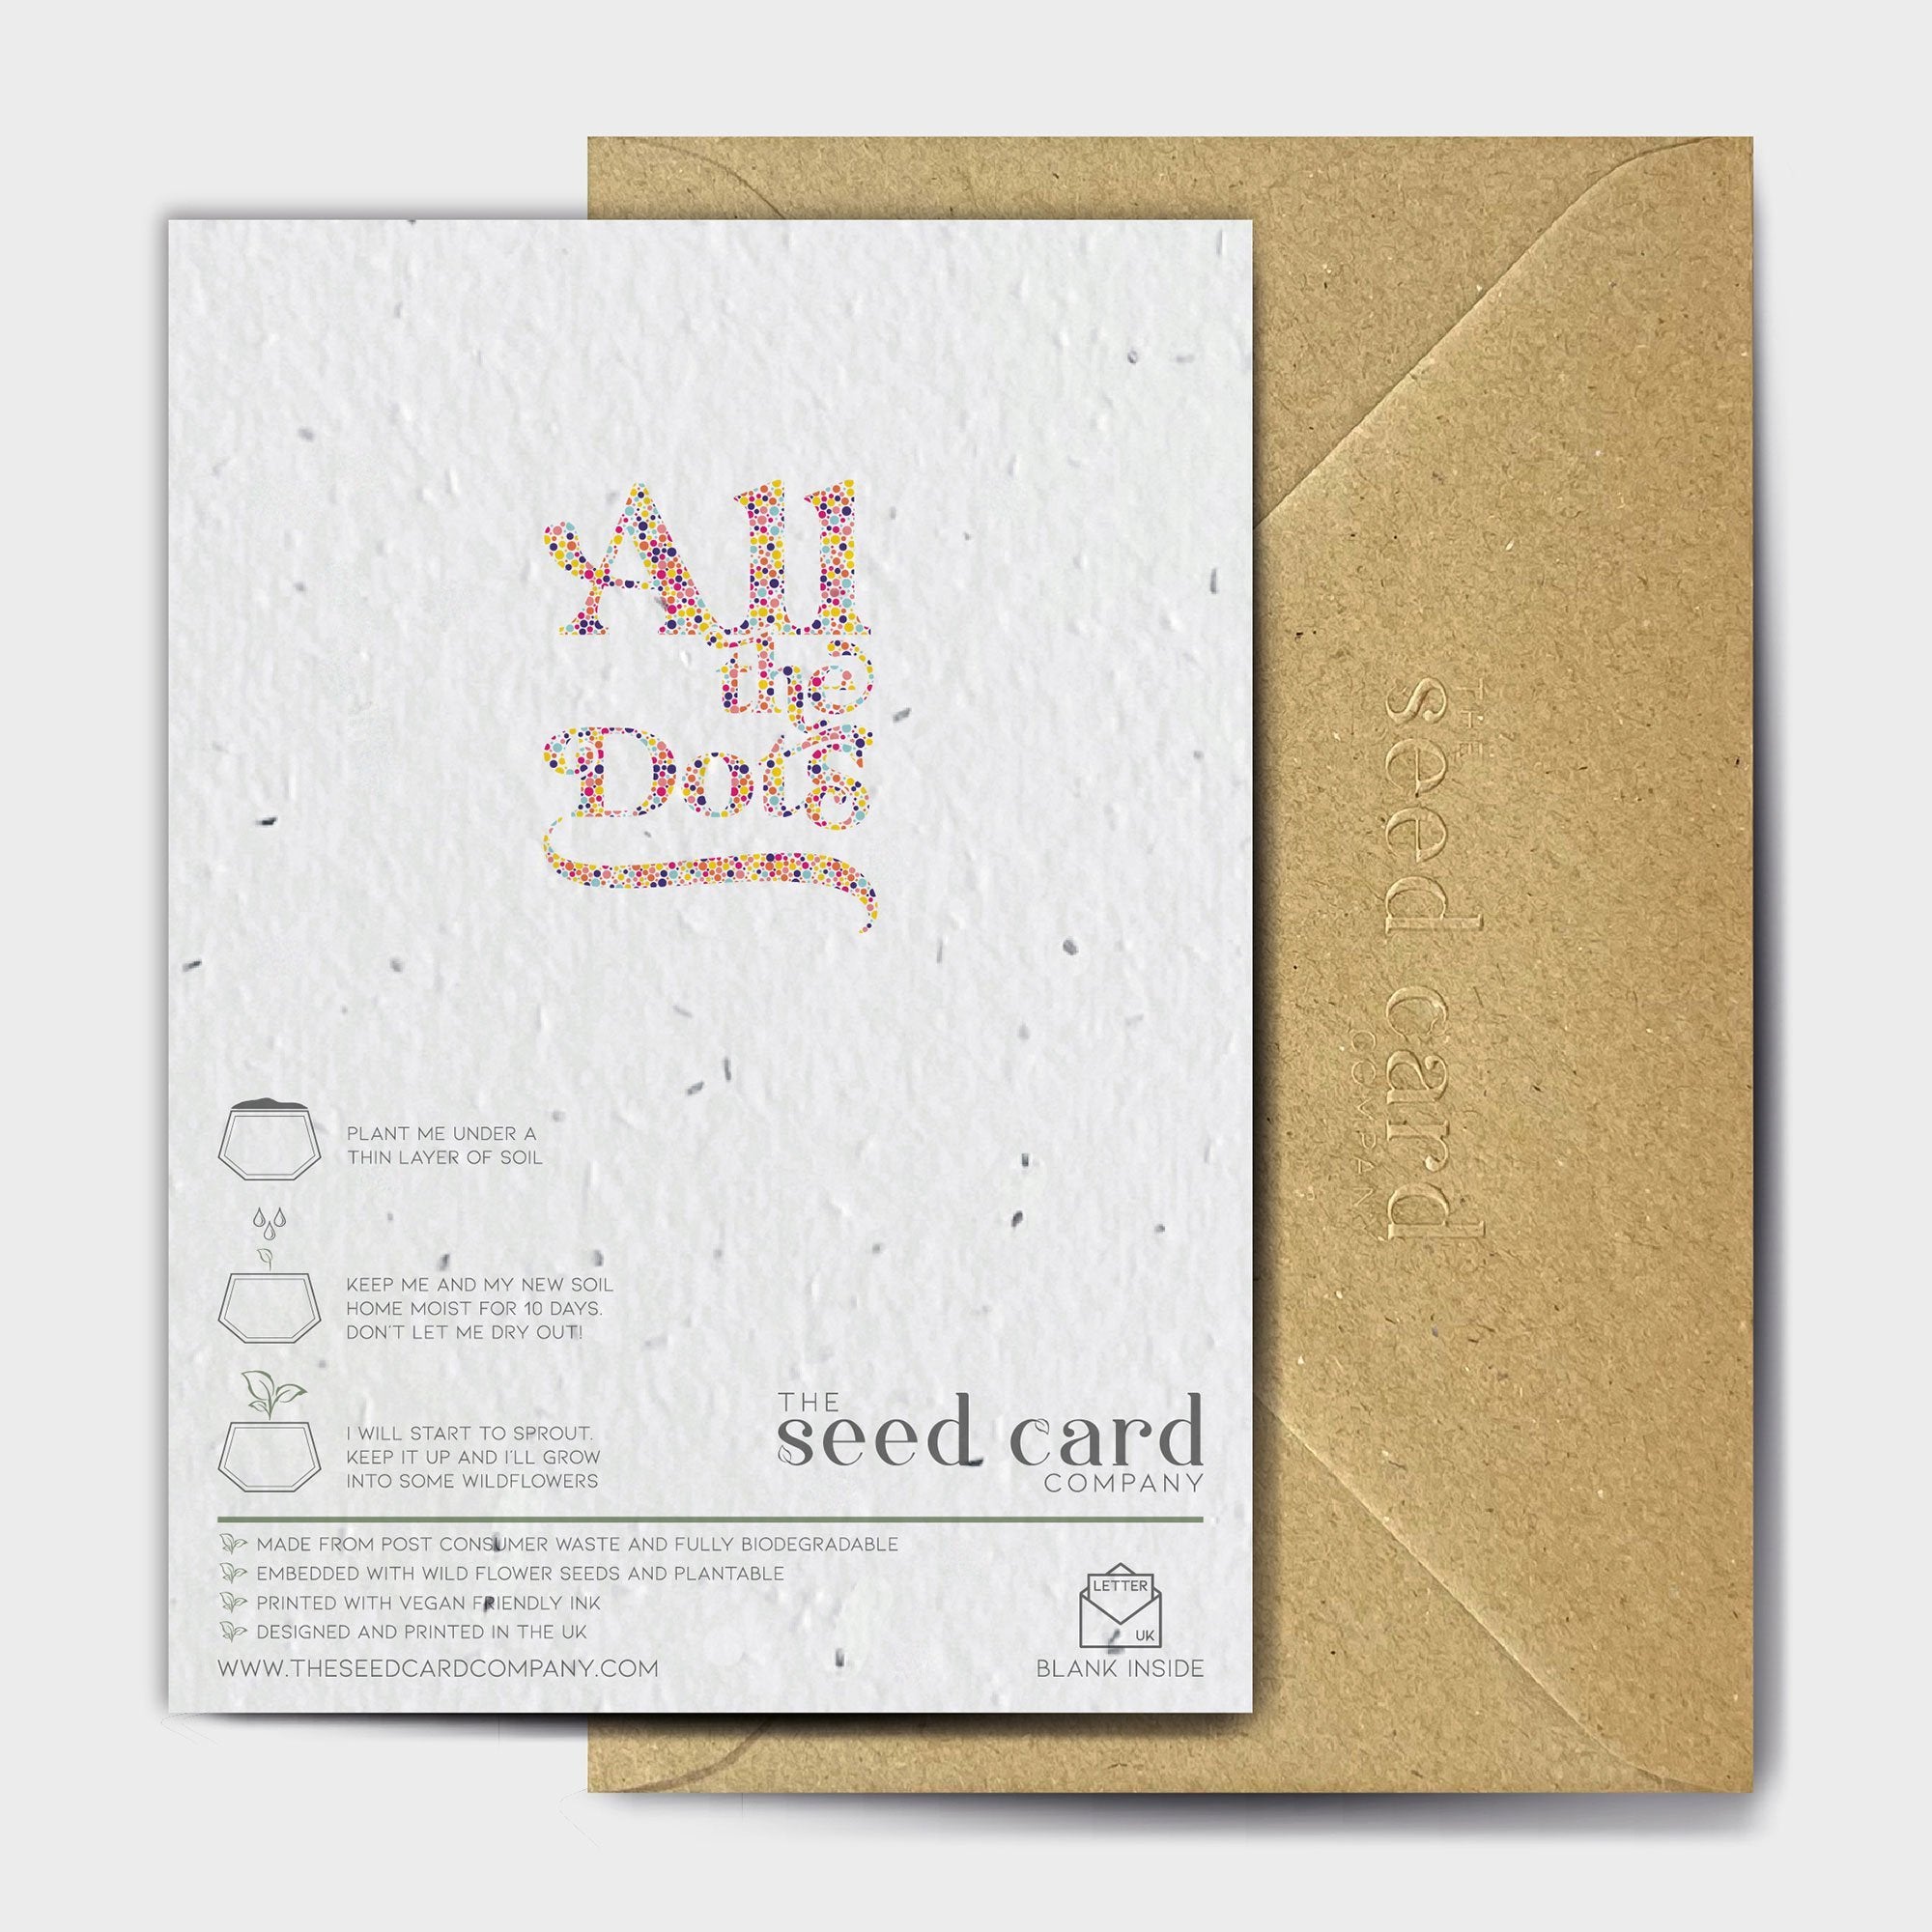 Shop online Dotty Thirty - 100% biodegradable seed-embedded cards Shop -The Seed Card Company